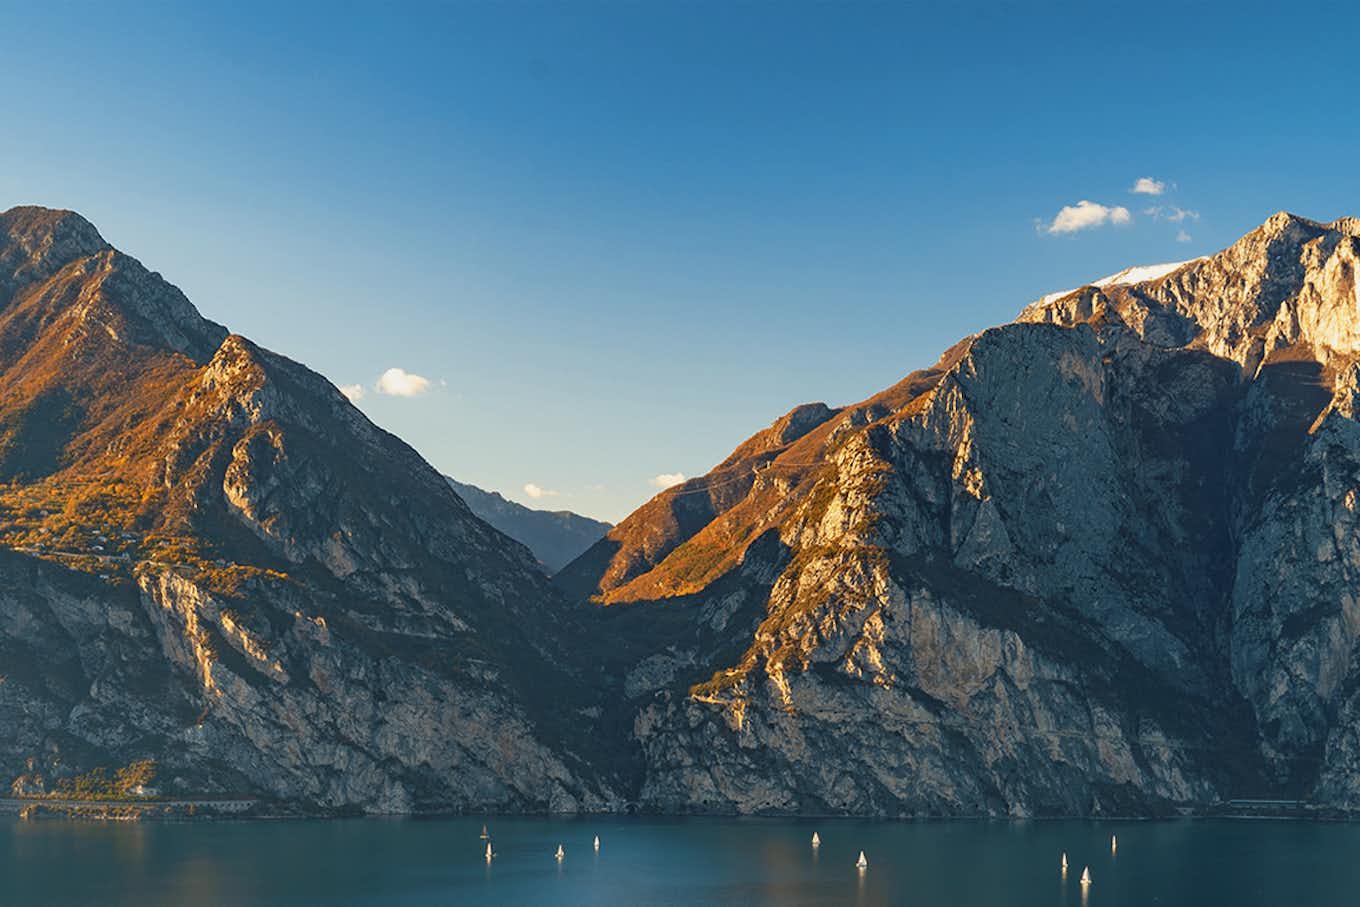 mountains & the lake in italy